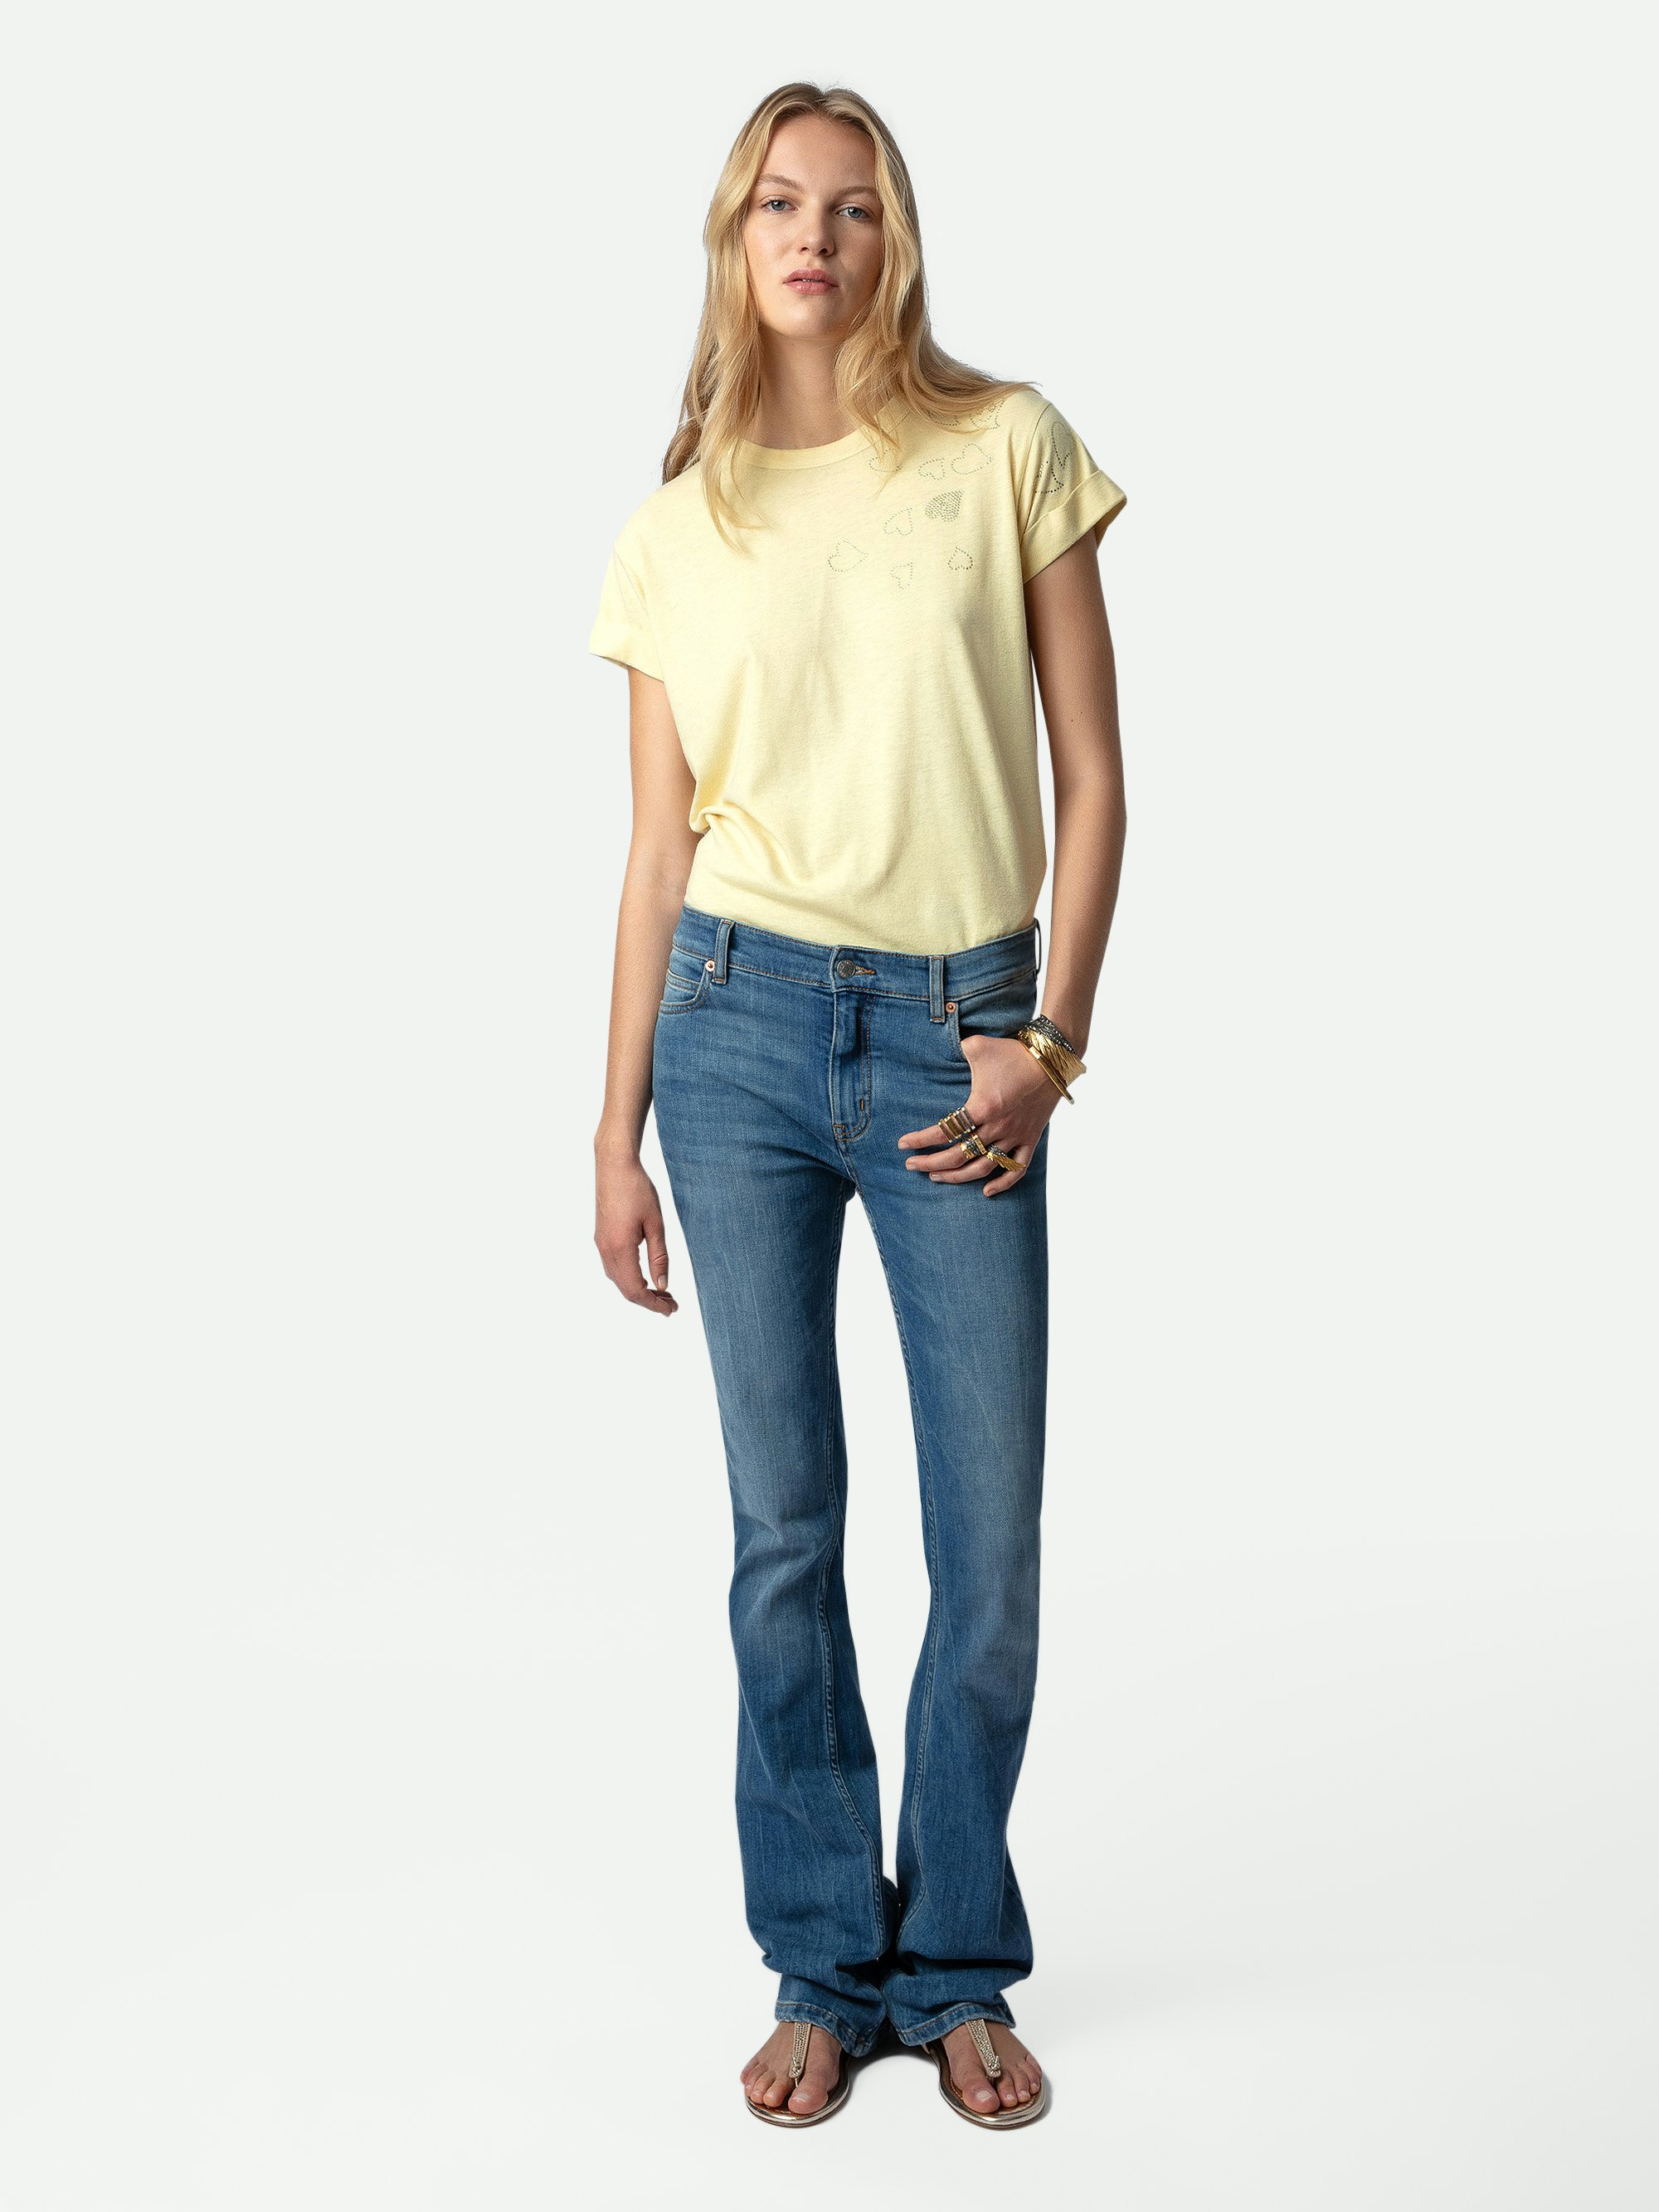 Anya Diamanté T-shirt - Light yellow round-neck T-shirt with short sleeves and diamanté hearts.